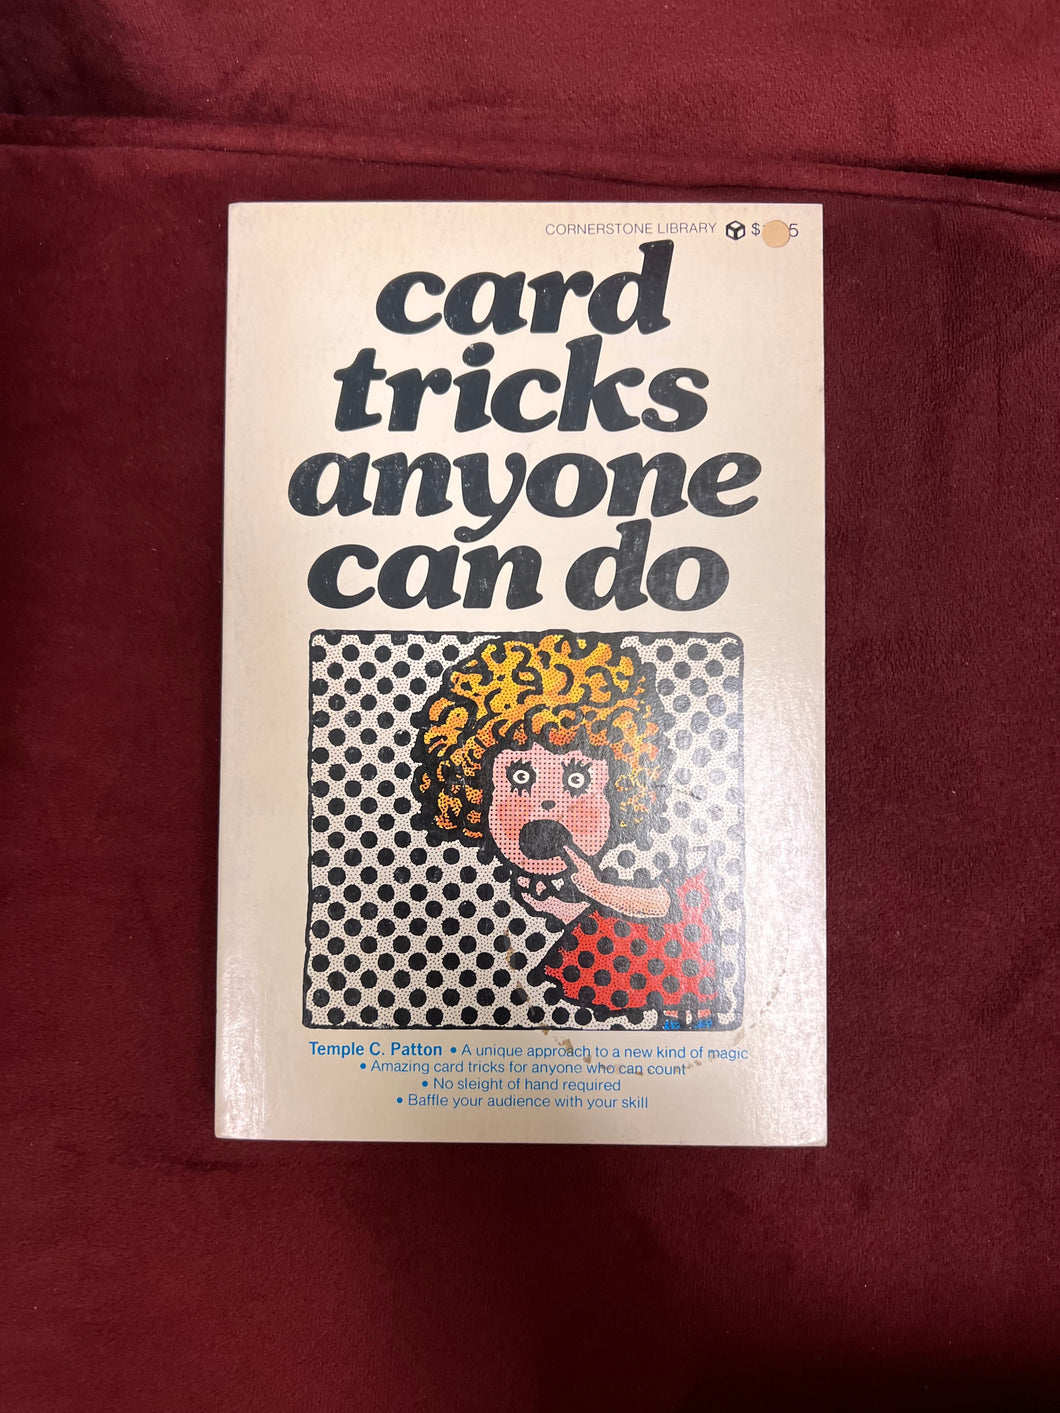 Card Tricks Anyone Can Do by Temple Patton